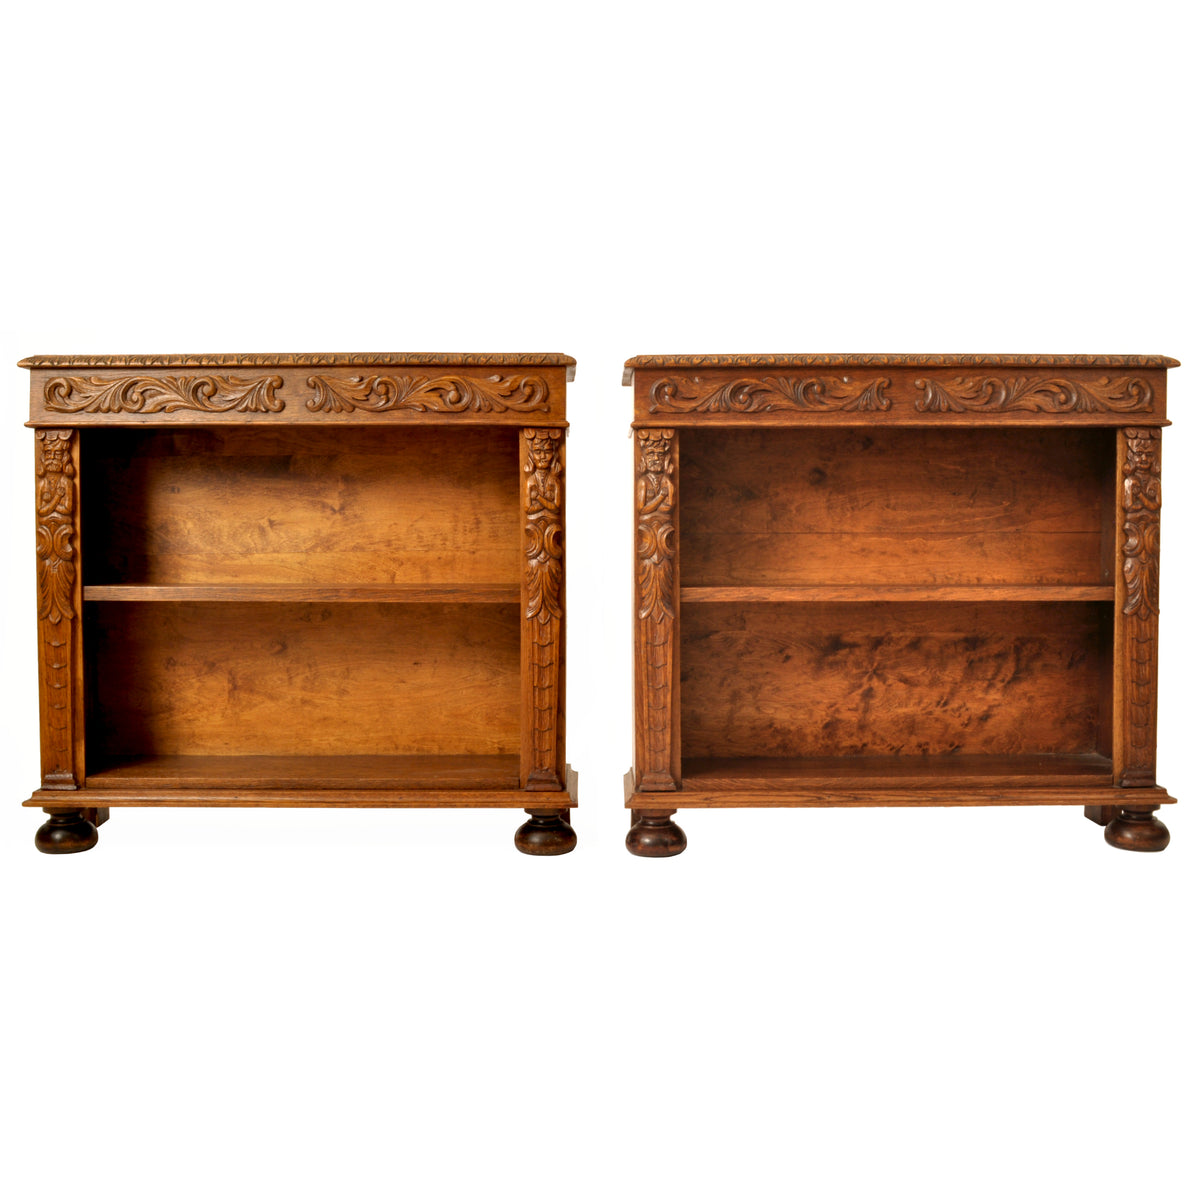 Pair of Antique 19th Century French Carved Oak Renaissance Revival Bookcases, circa 1880